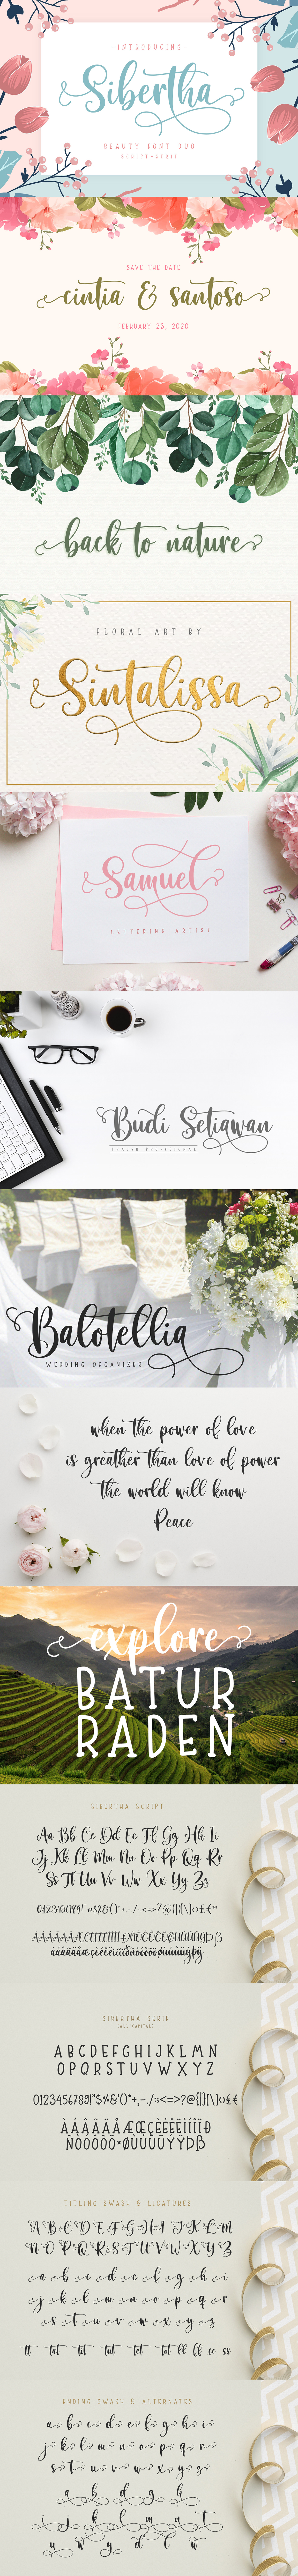 Free Sibertha Script Font is a gorgeous font duo full of charm, It brings together a fun script.